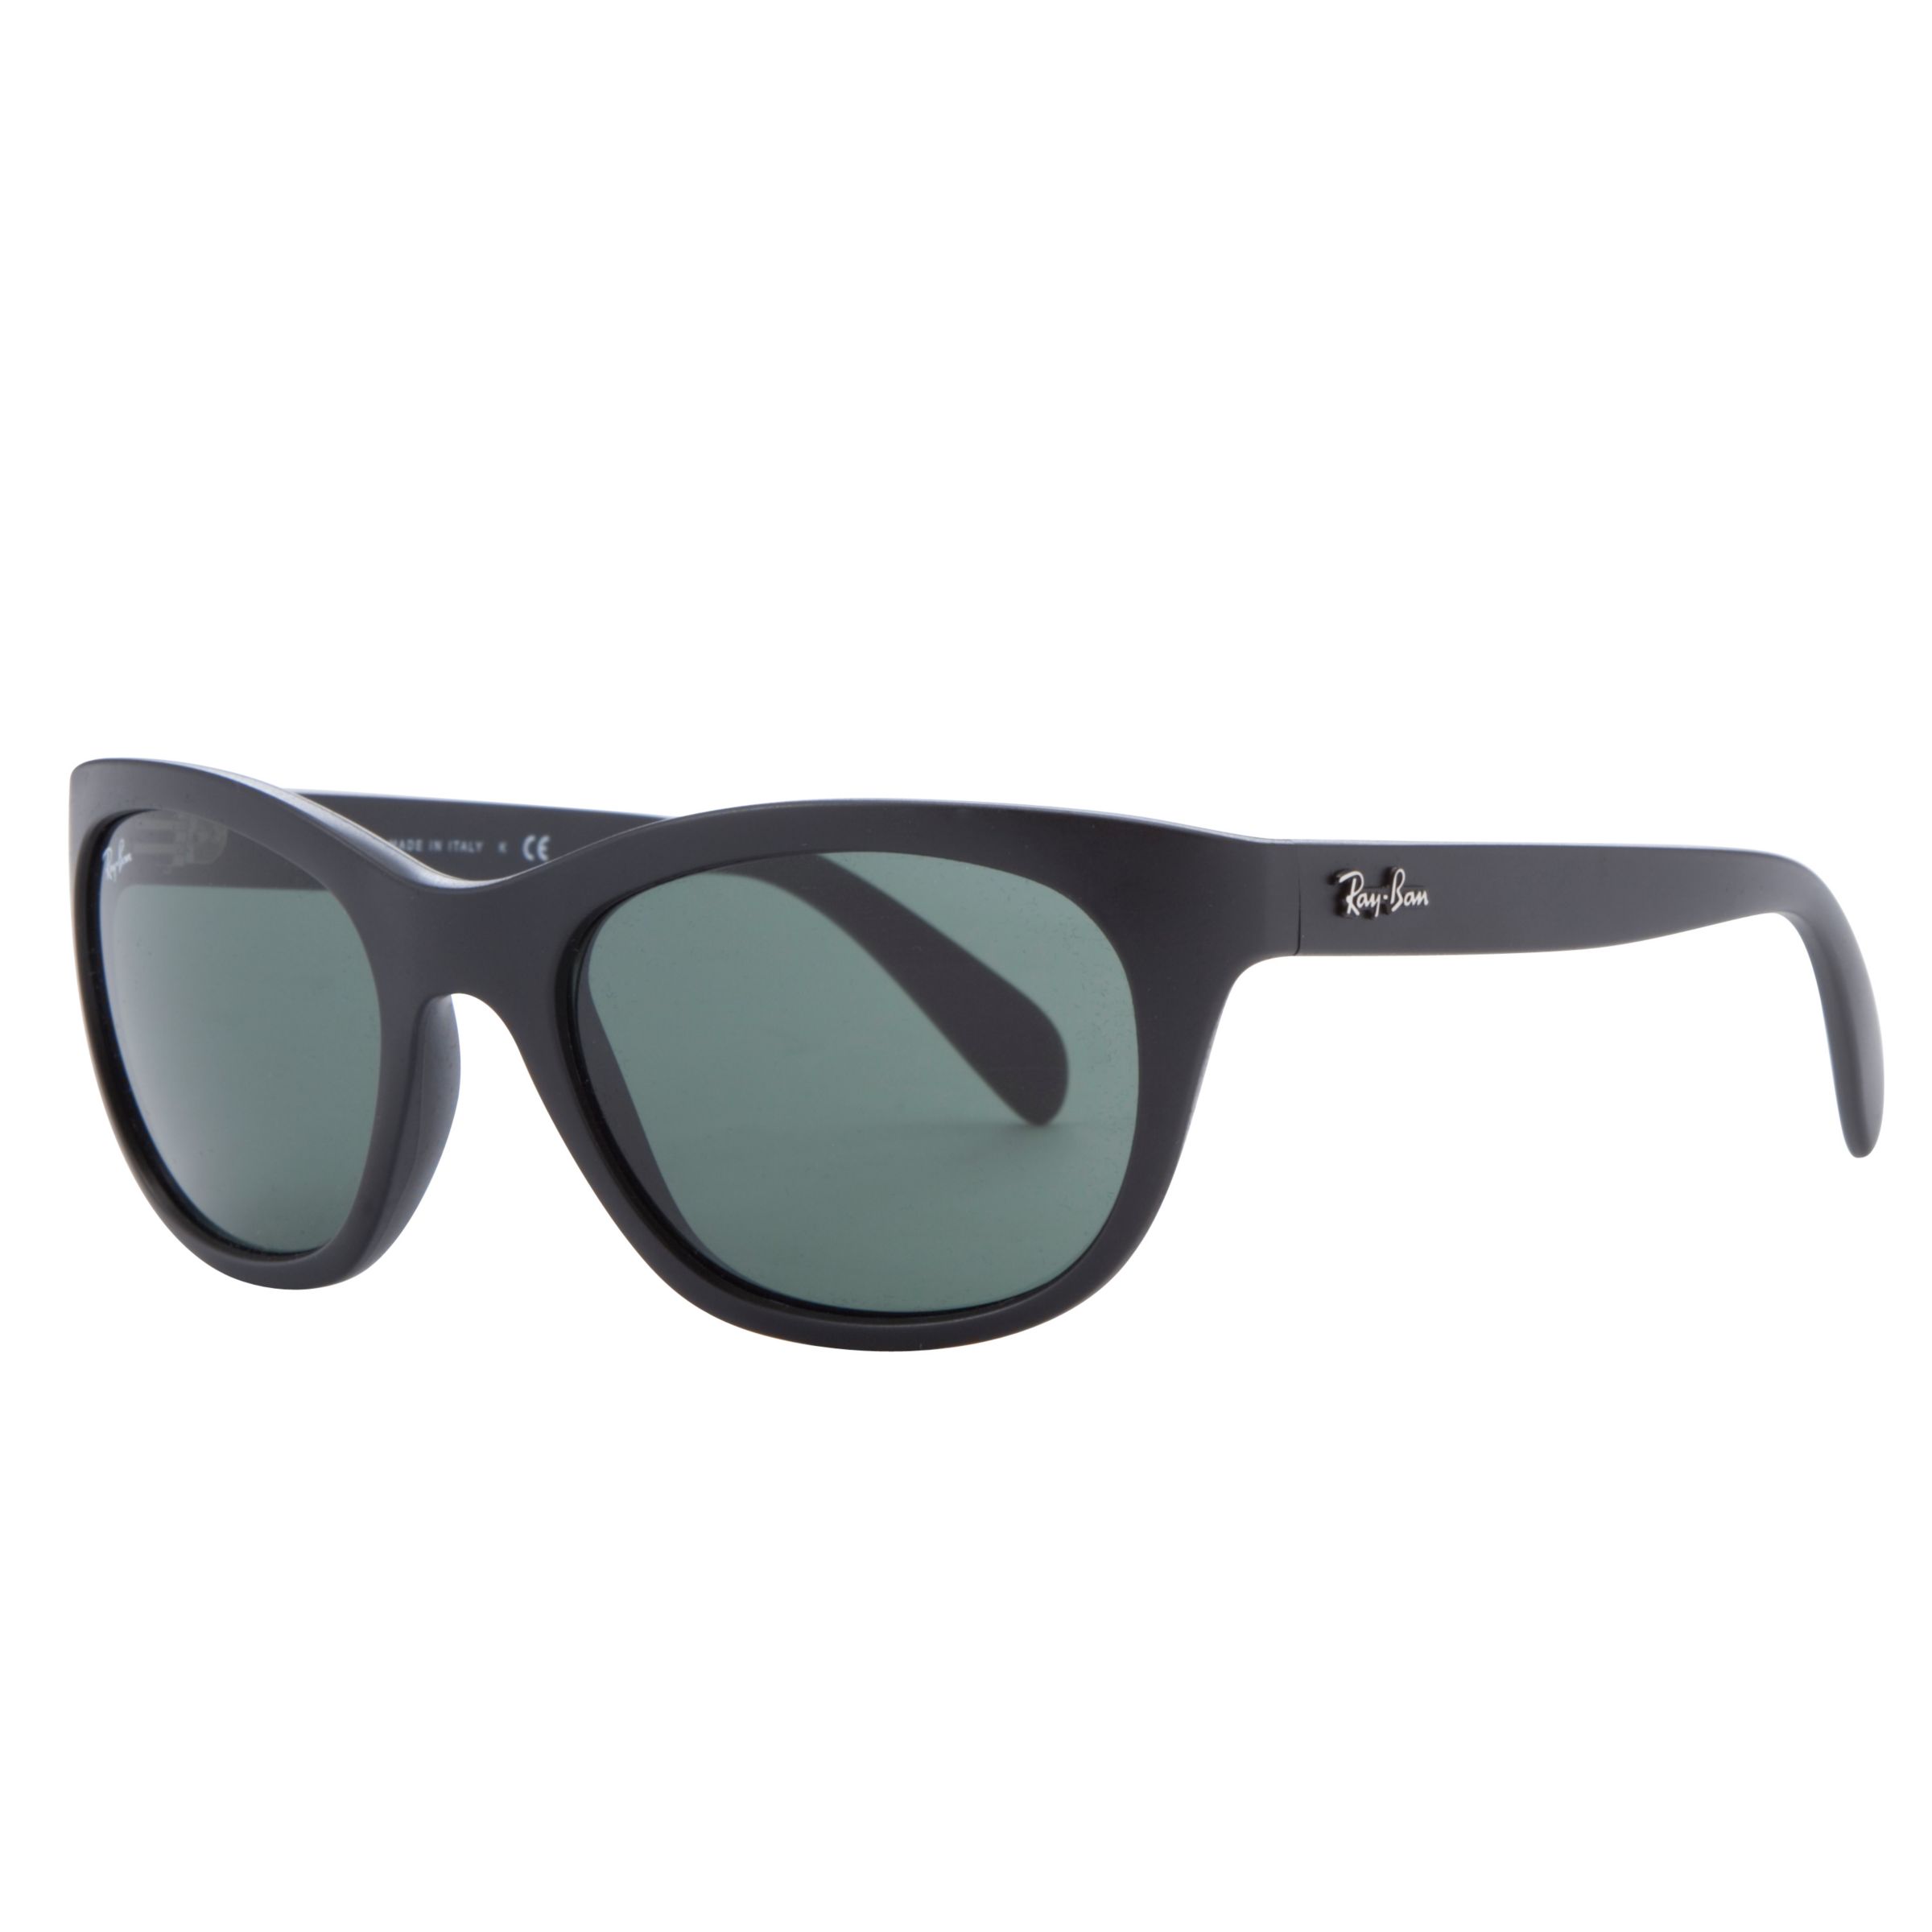 Ray-Ban RB4216 Oval Sunglasses, Matte Black